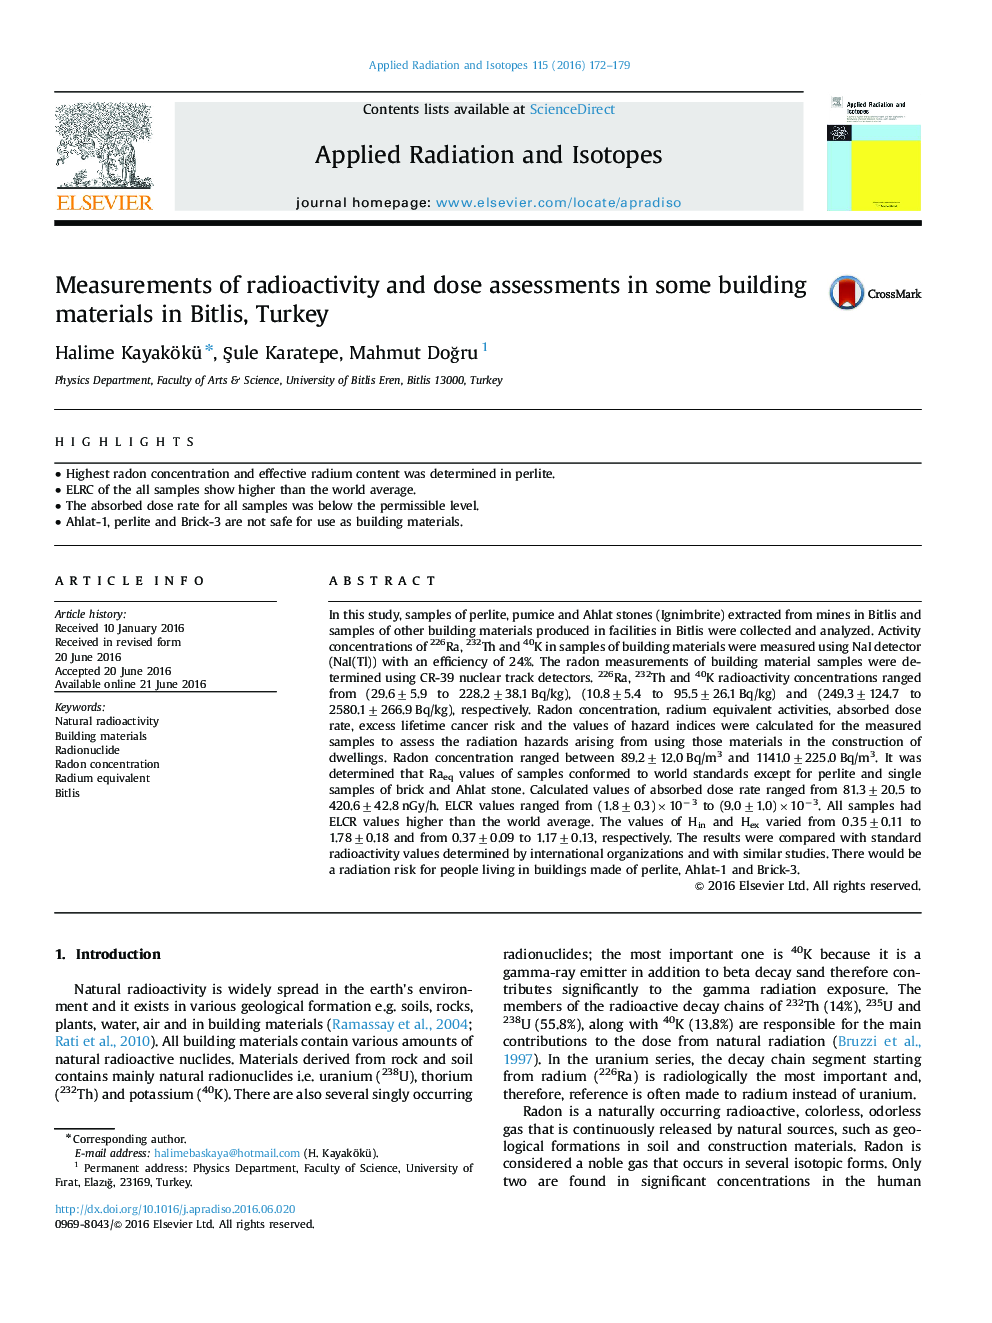 Measurements of radioactivity and dose assessments in some building materials in Bitlis, Turkey